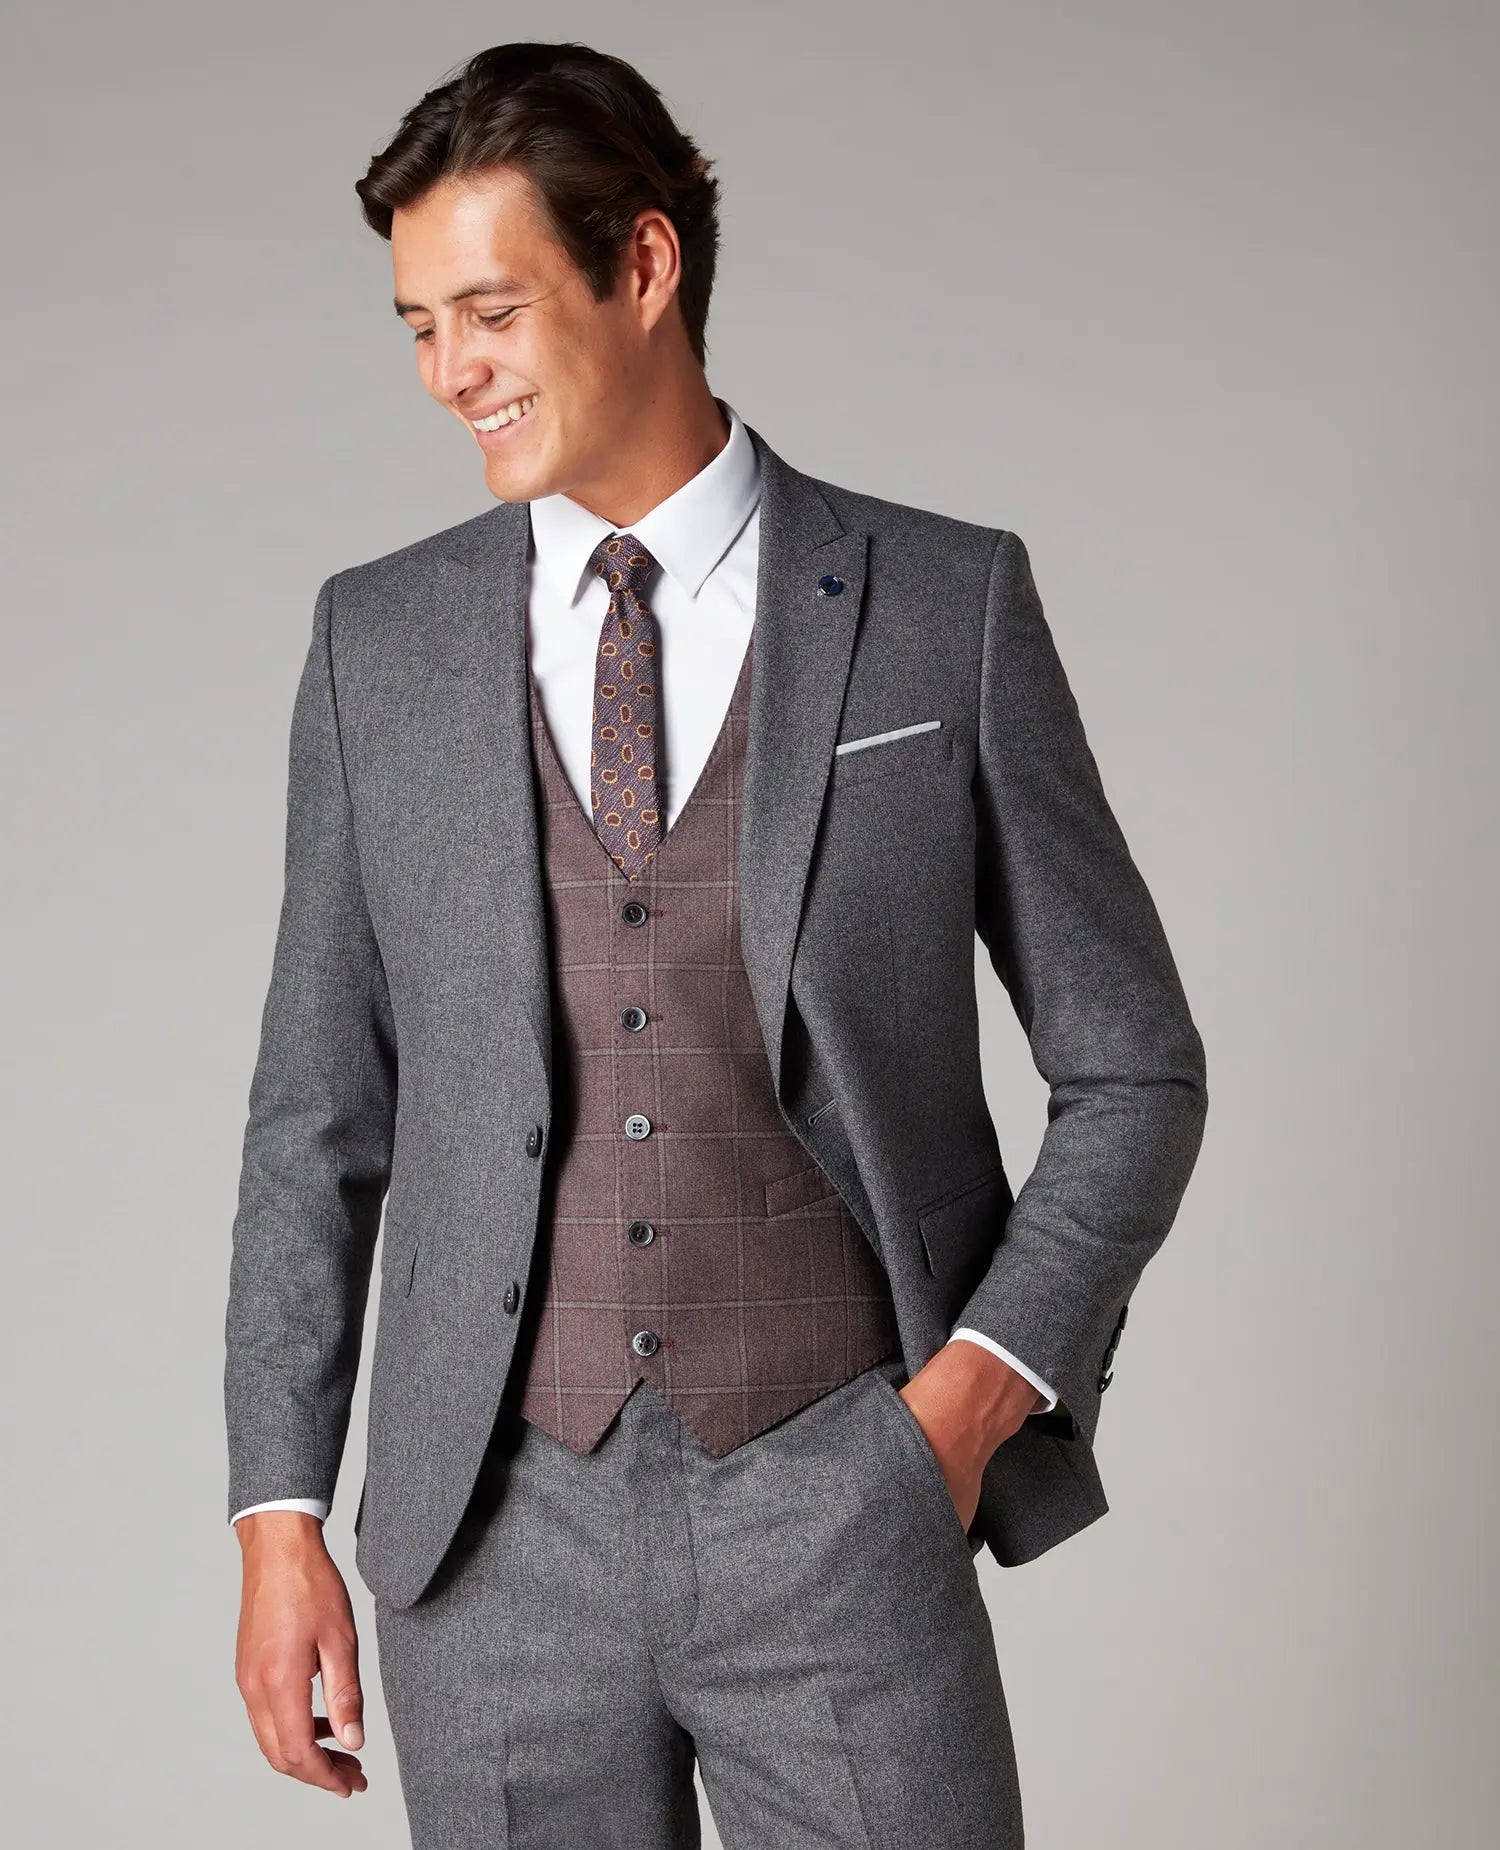 Remus Uomo Mario Charcoal Grey Textured Suit Jacket From Woven Durham